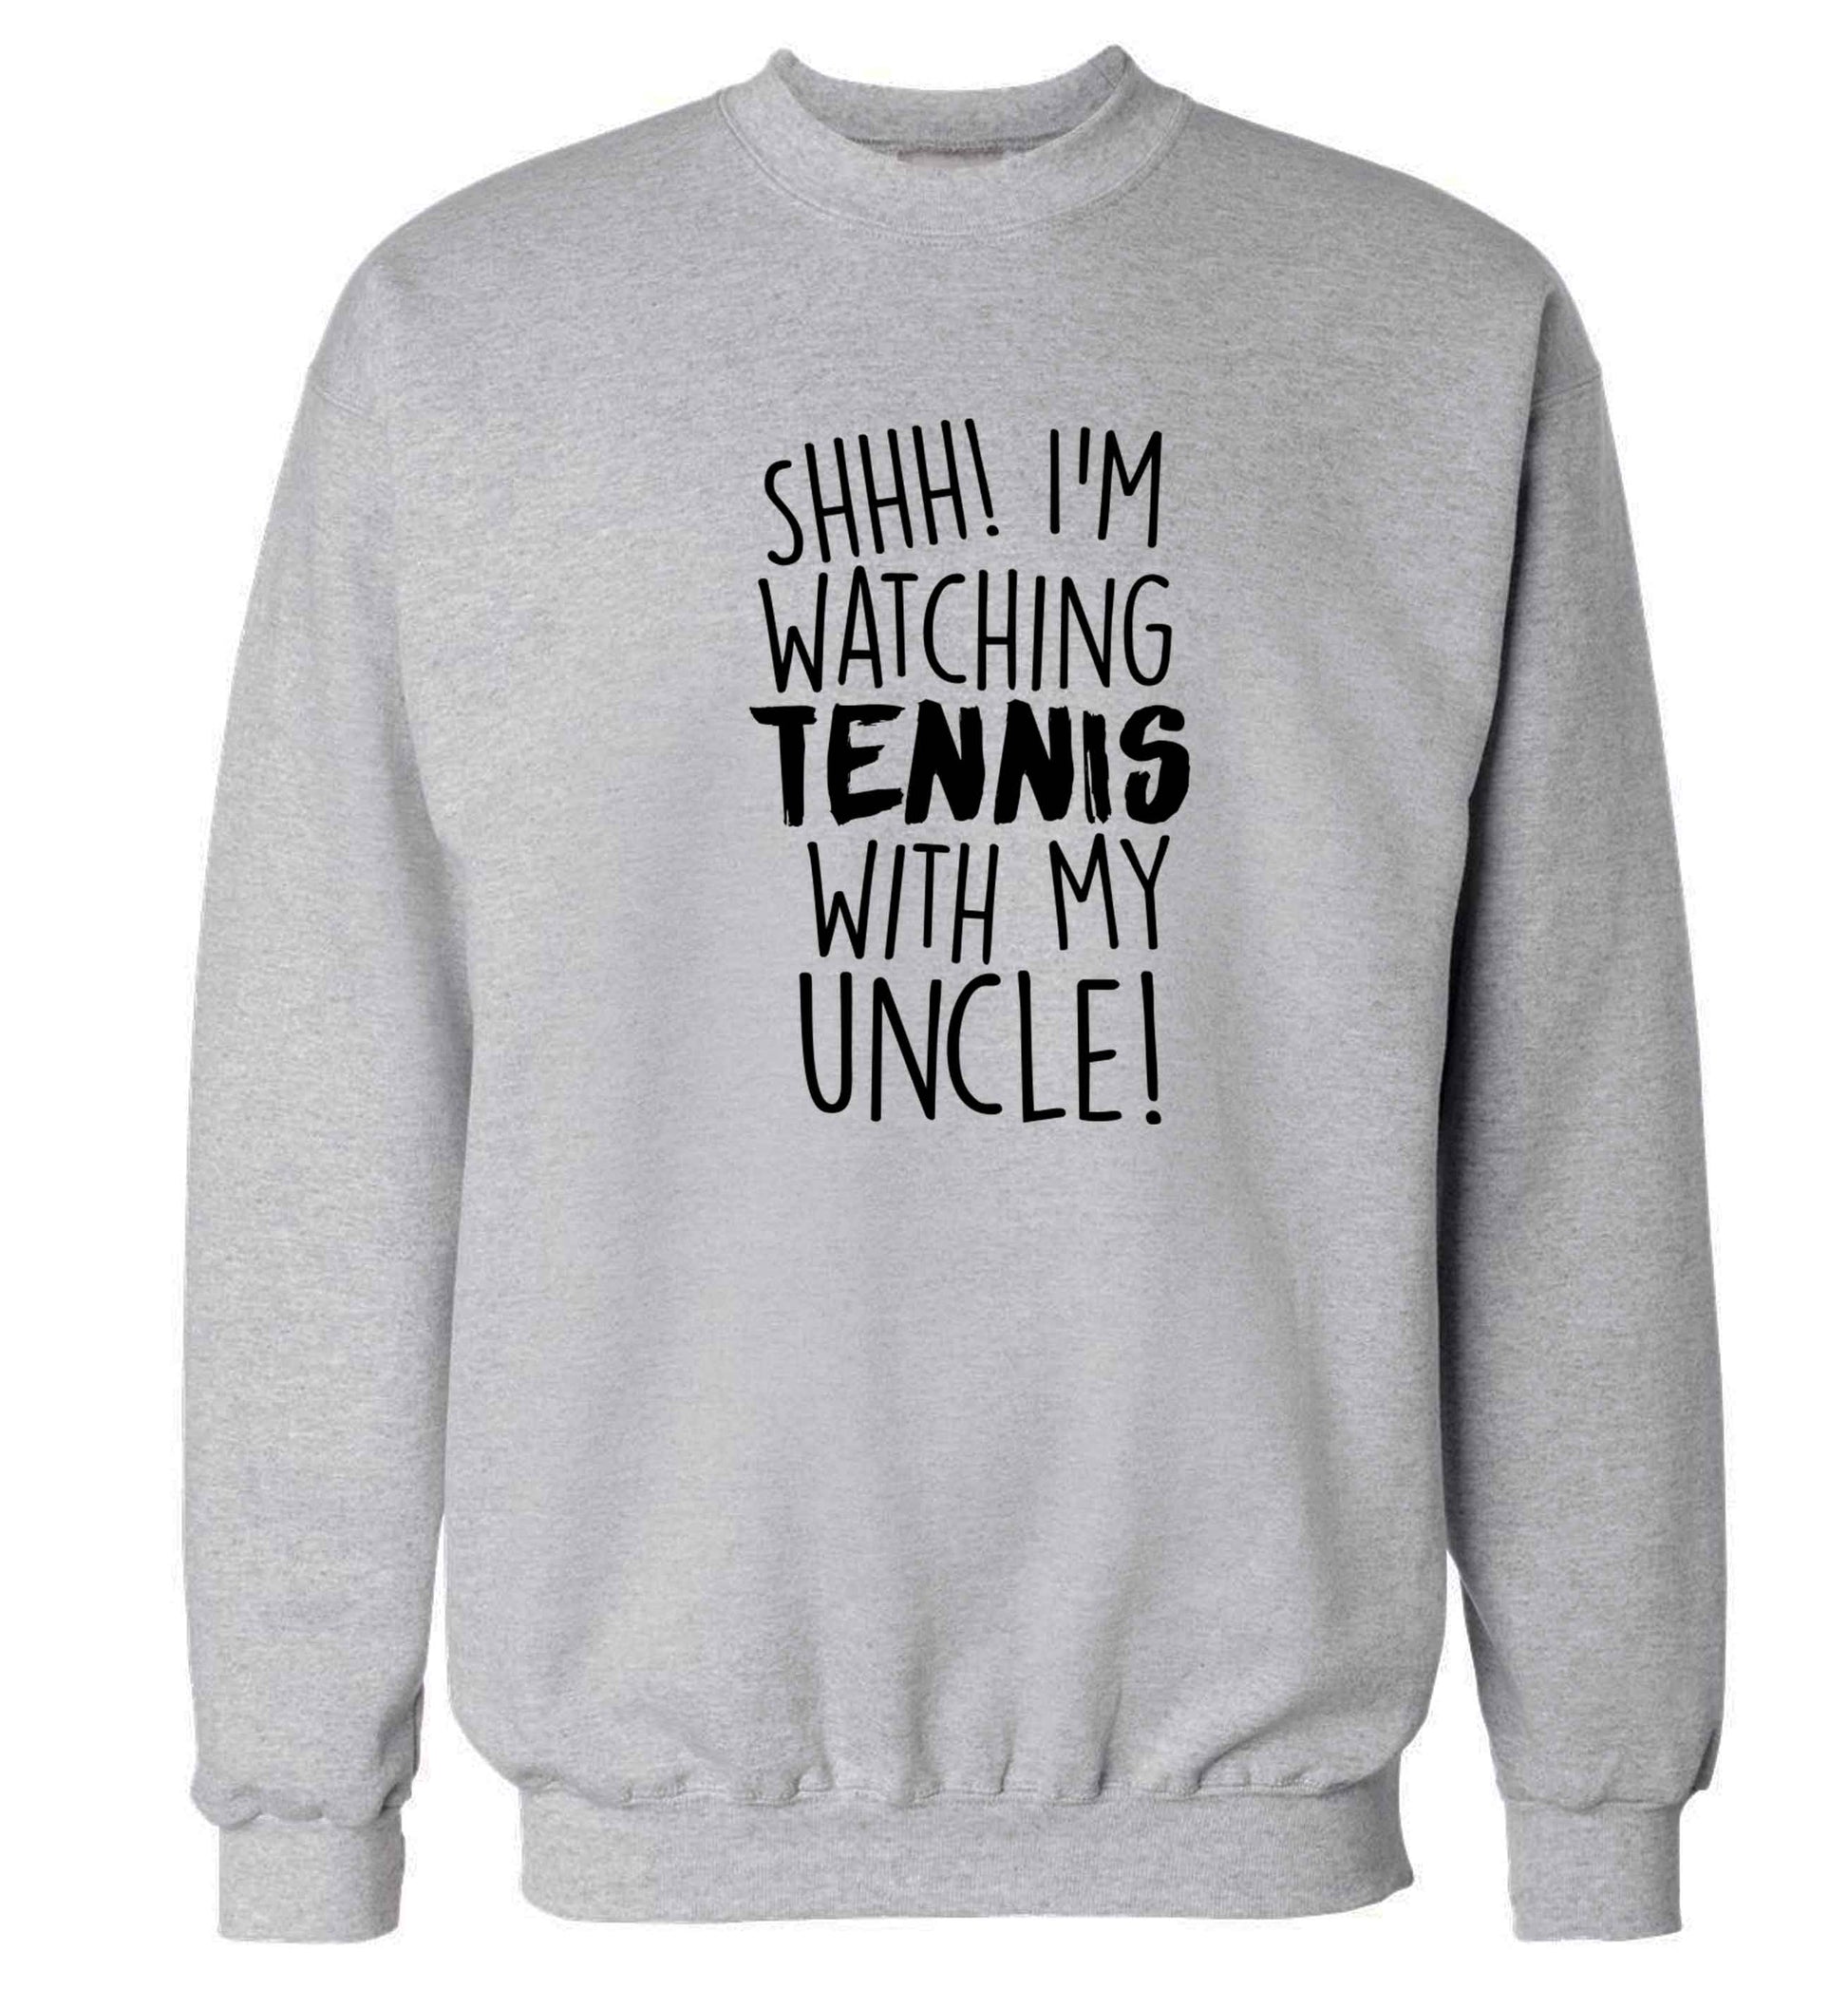 Shh! I'm watching tennis with my uncle! Adult's unisex grey Sweater 2XL